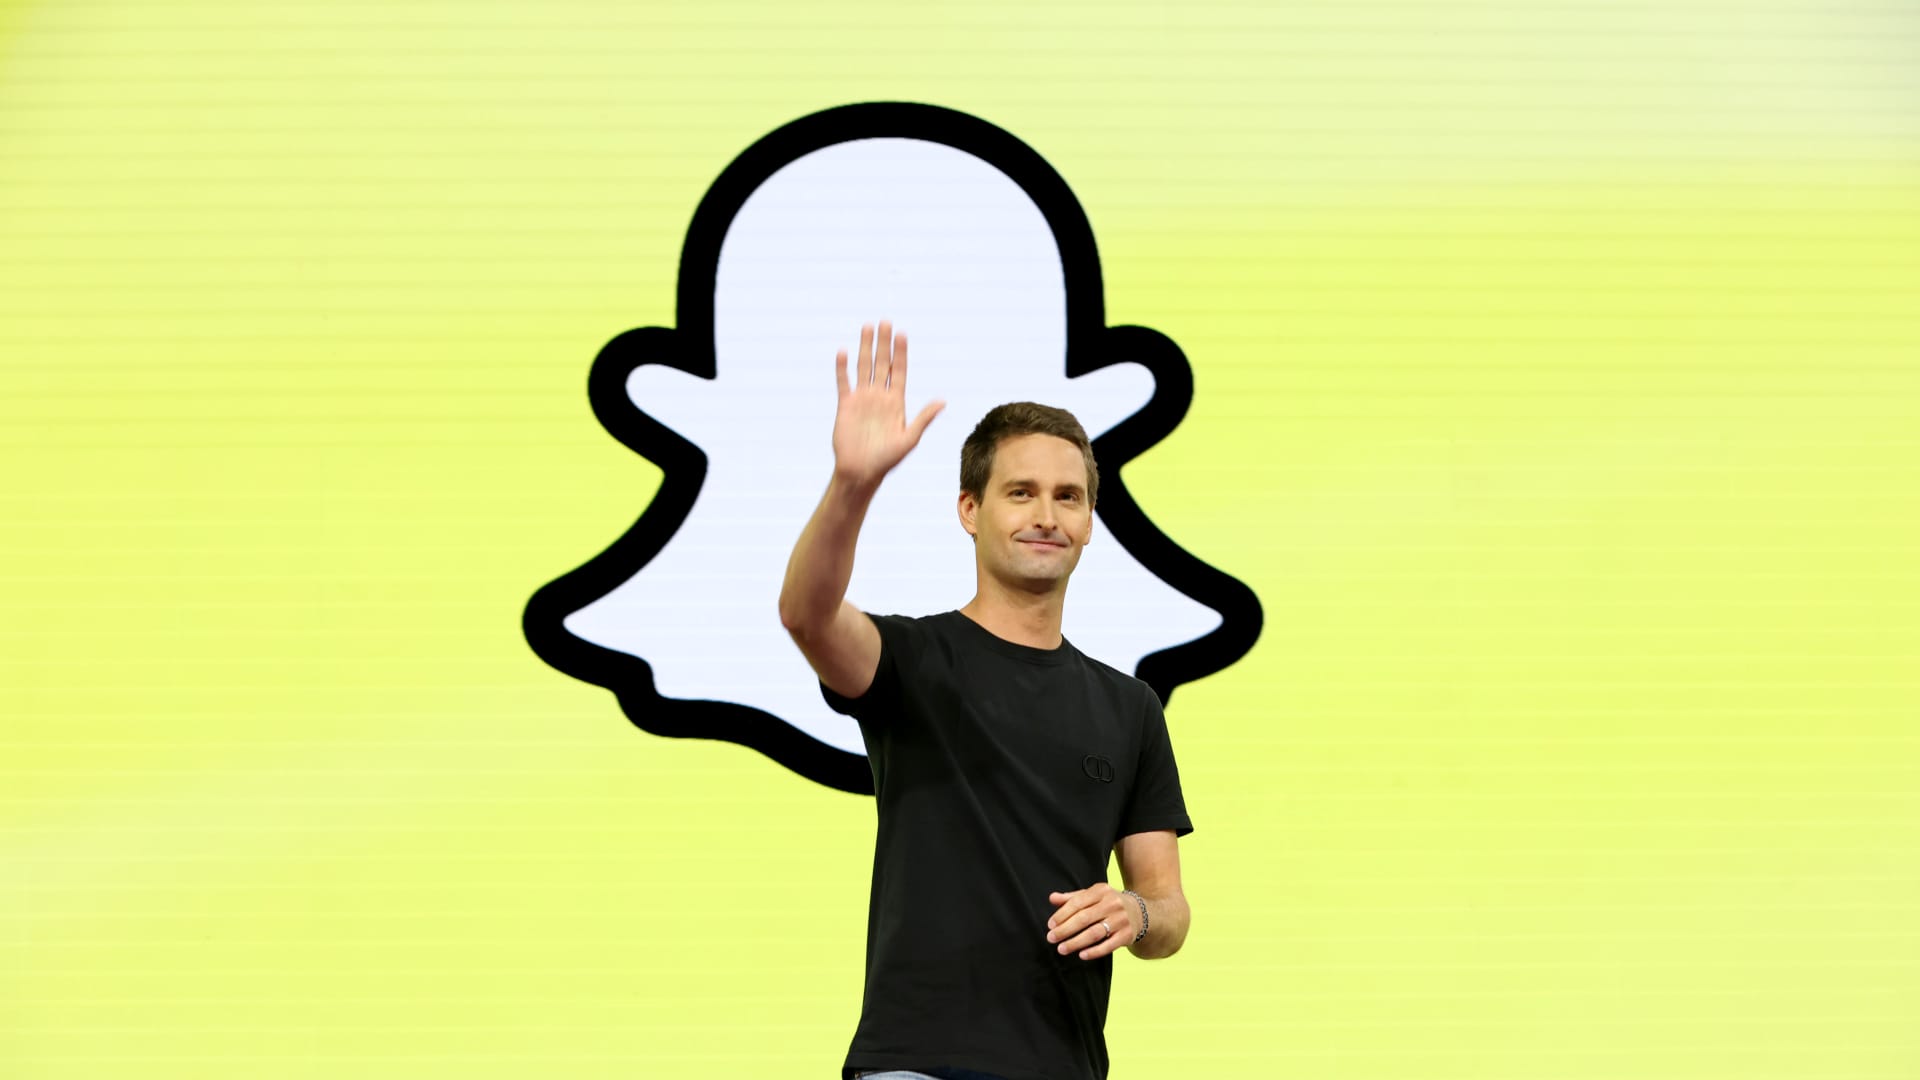 Snap drops 30% after revenue miss, weak guidance, show advertising struggles